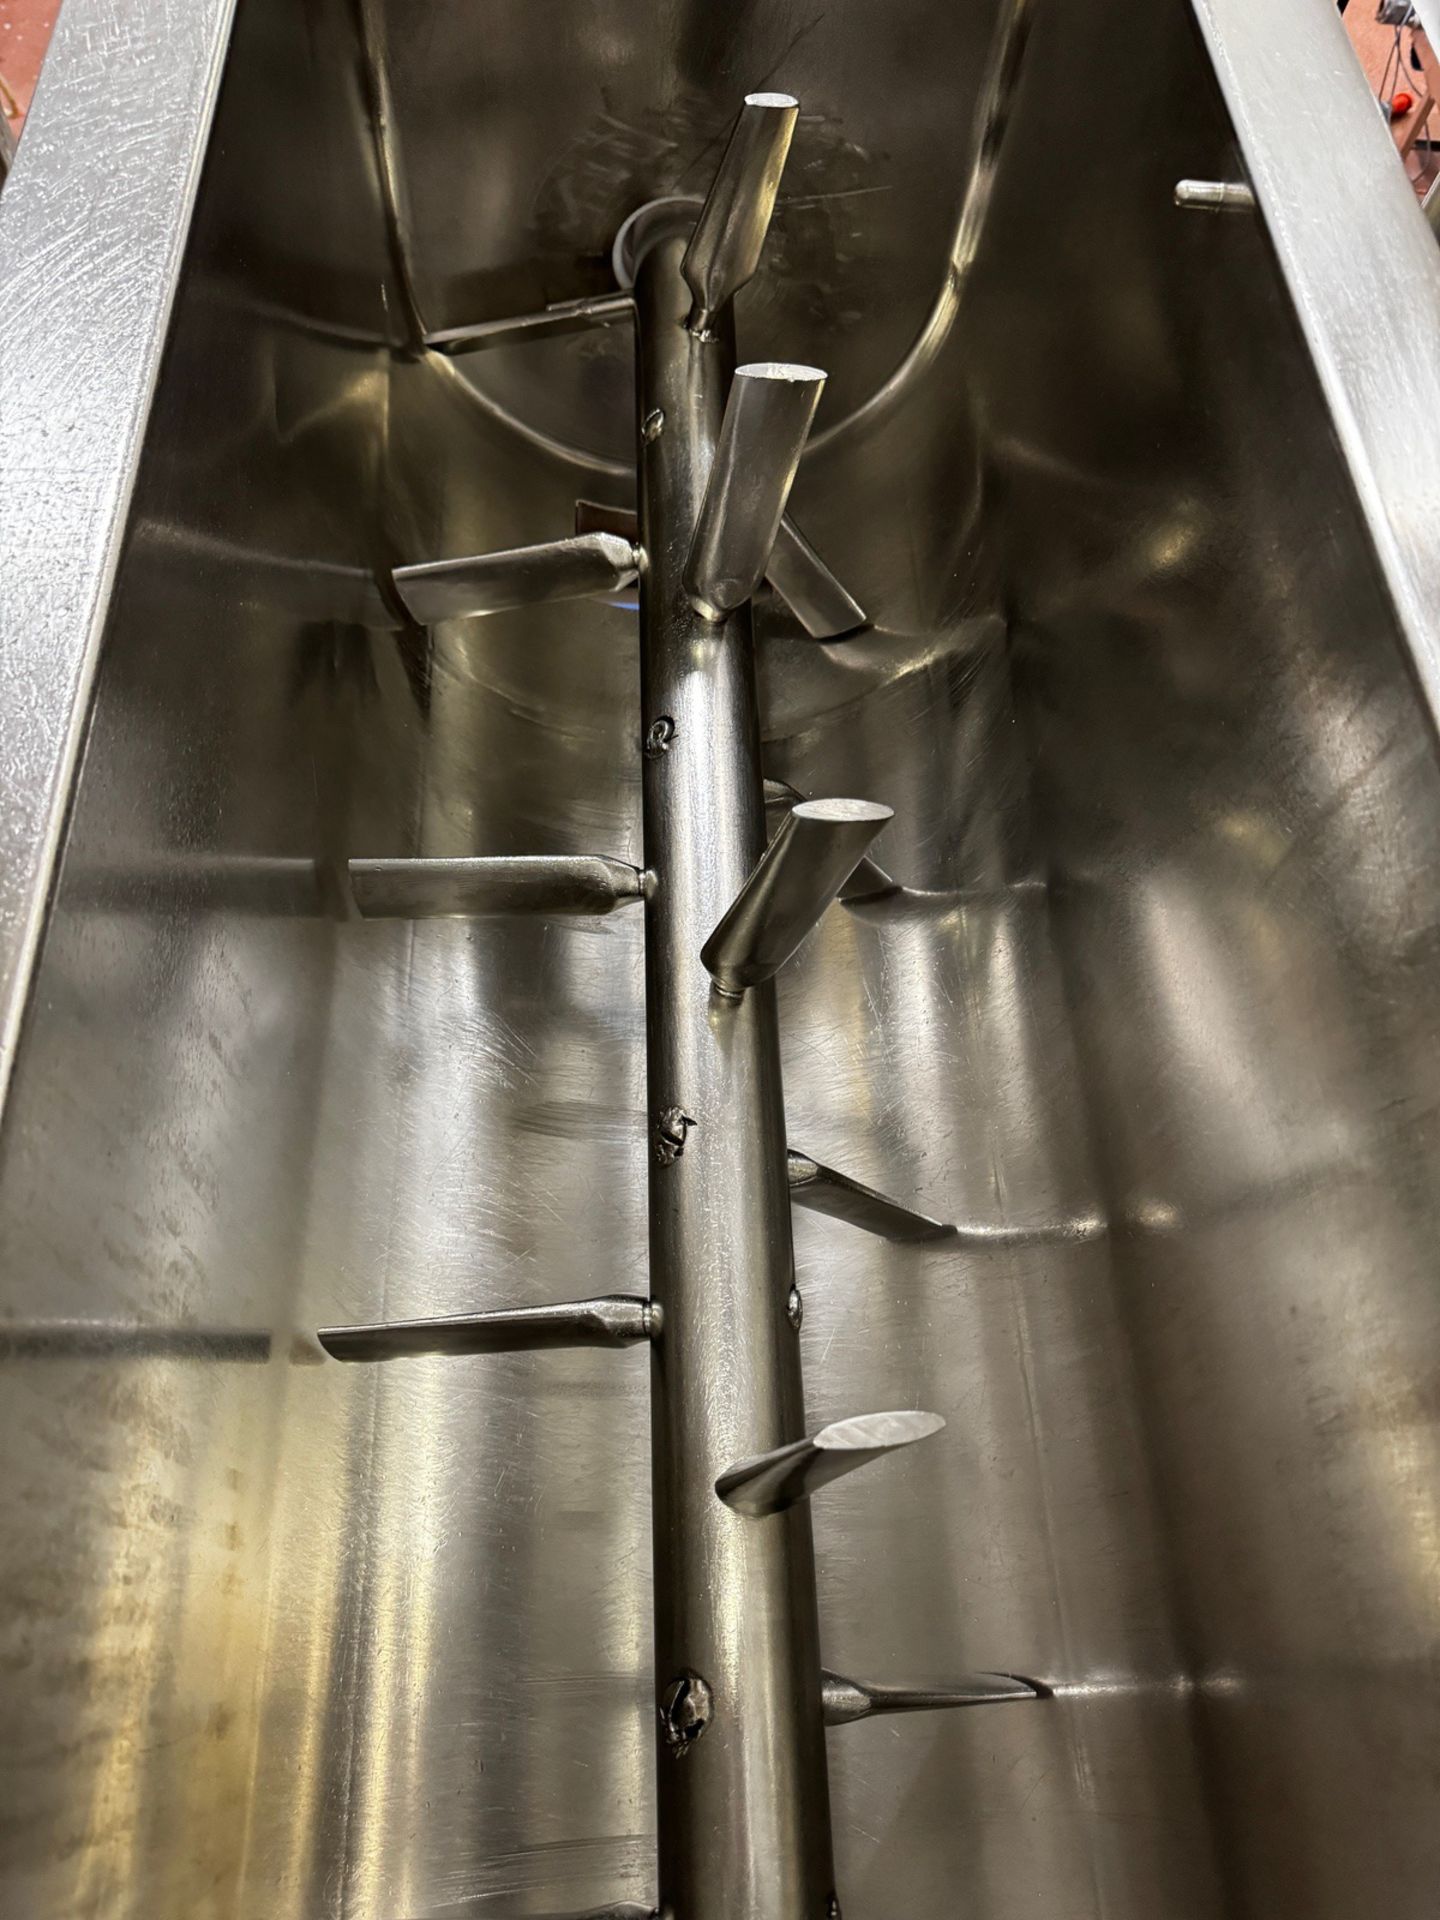 Pasta Technologies Stainless Single Grim Continuous Mixer, Ingredient - Subj to Bulk | Rig Fee $4500 - Image 5 of 6